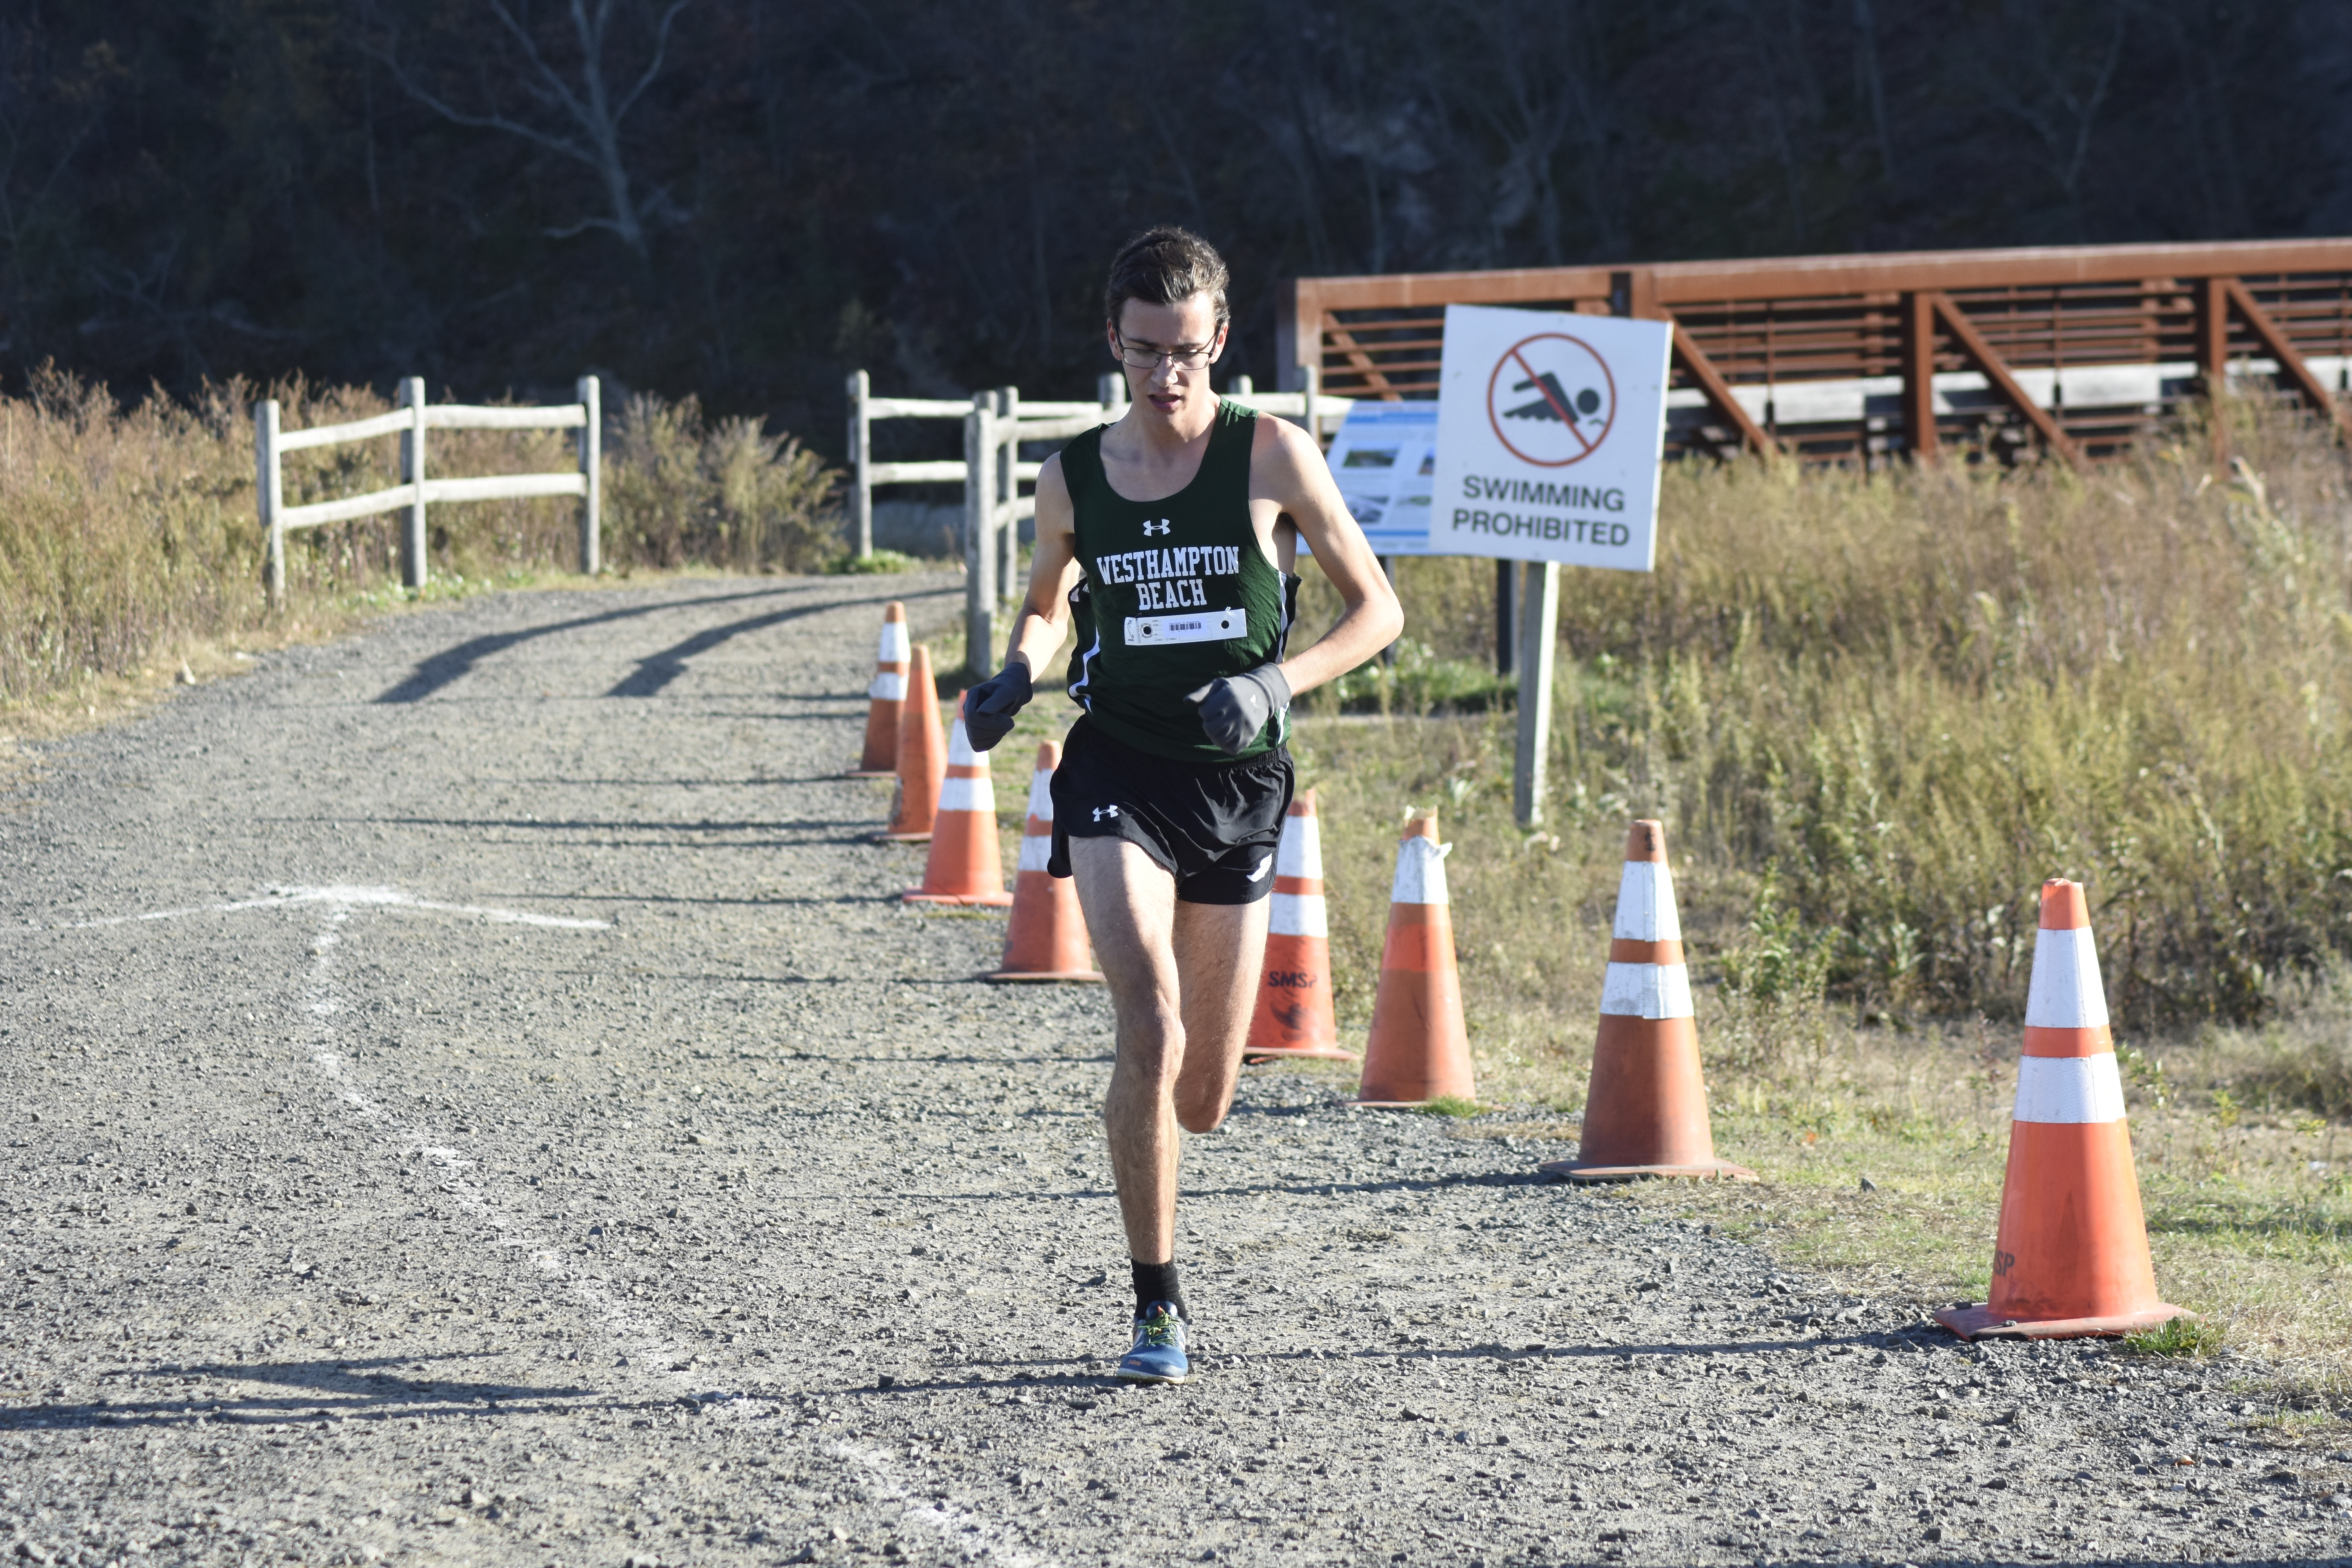 Gavin Ehlers finished second in Class B and led the Hurricanes throughout the race.